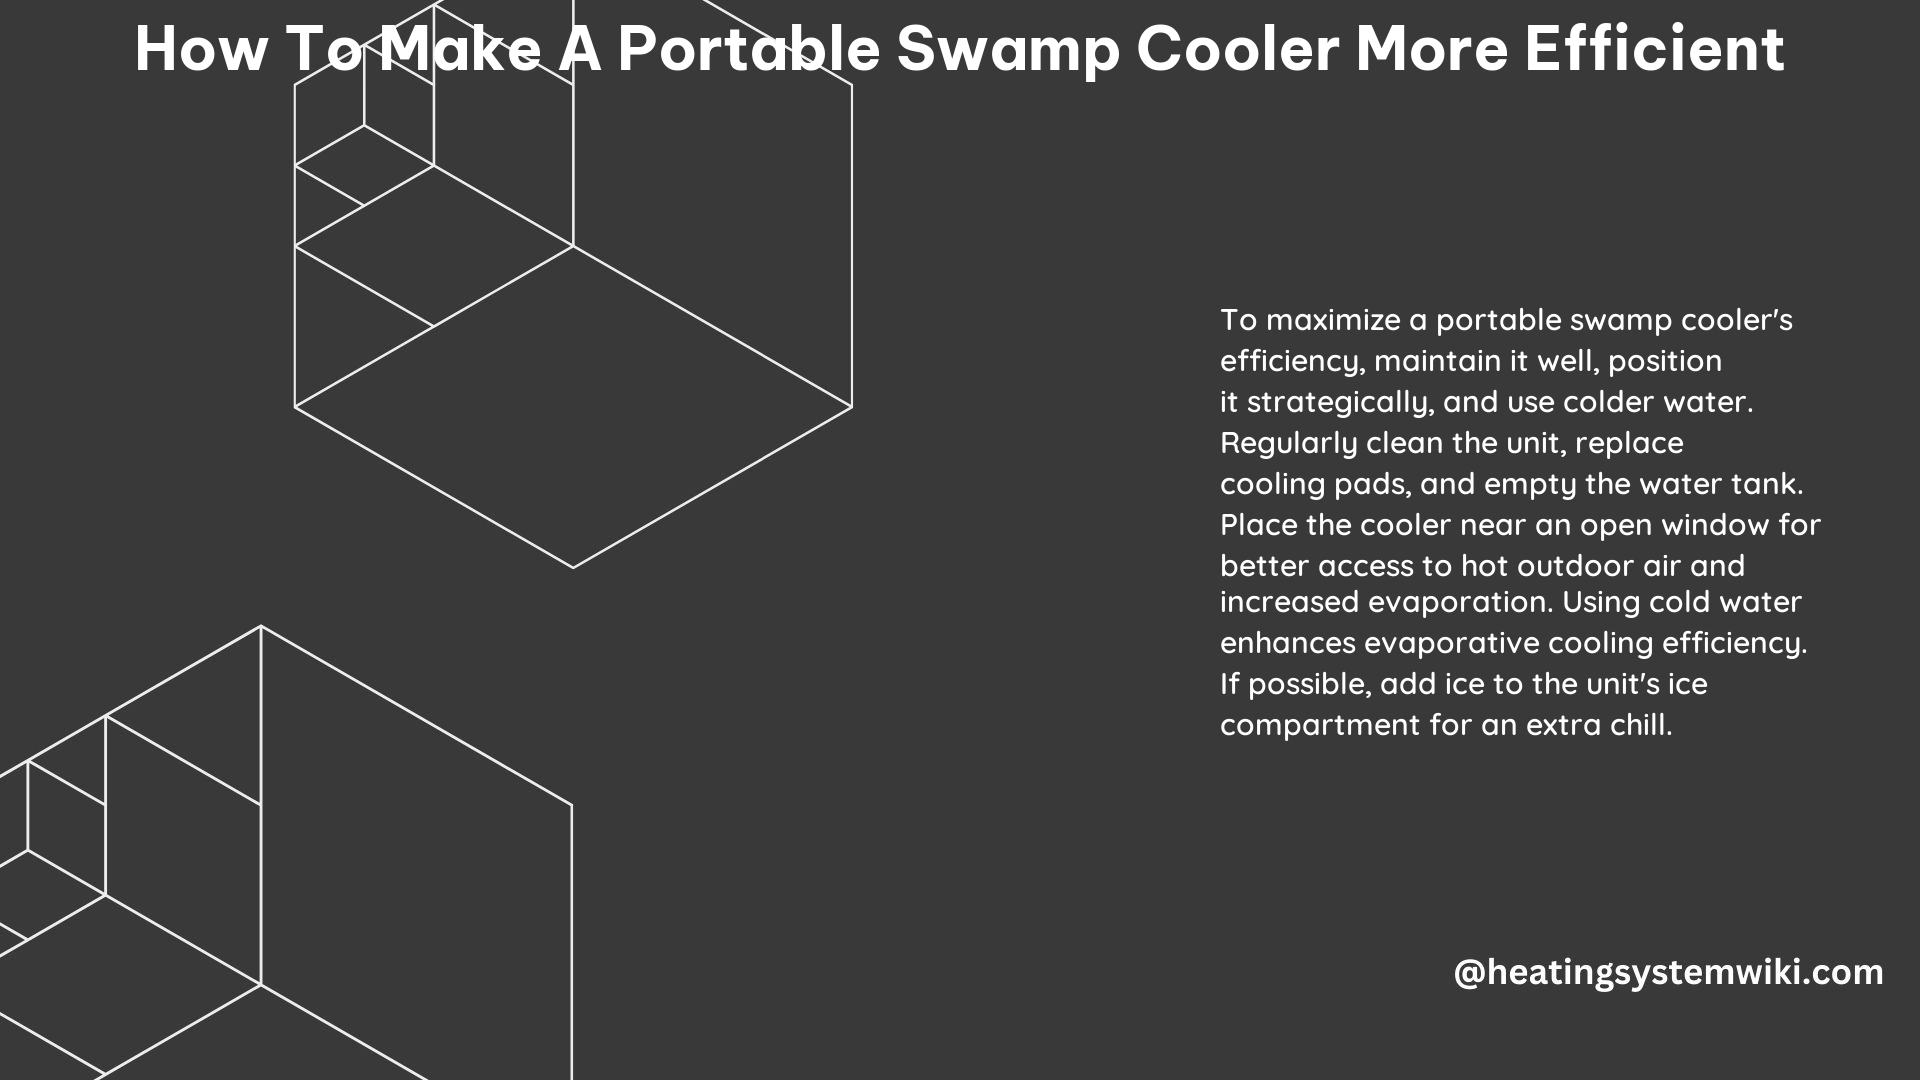 How to Make a Portable Swamp Cooler More Efficient